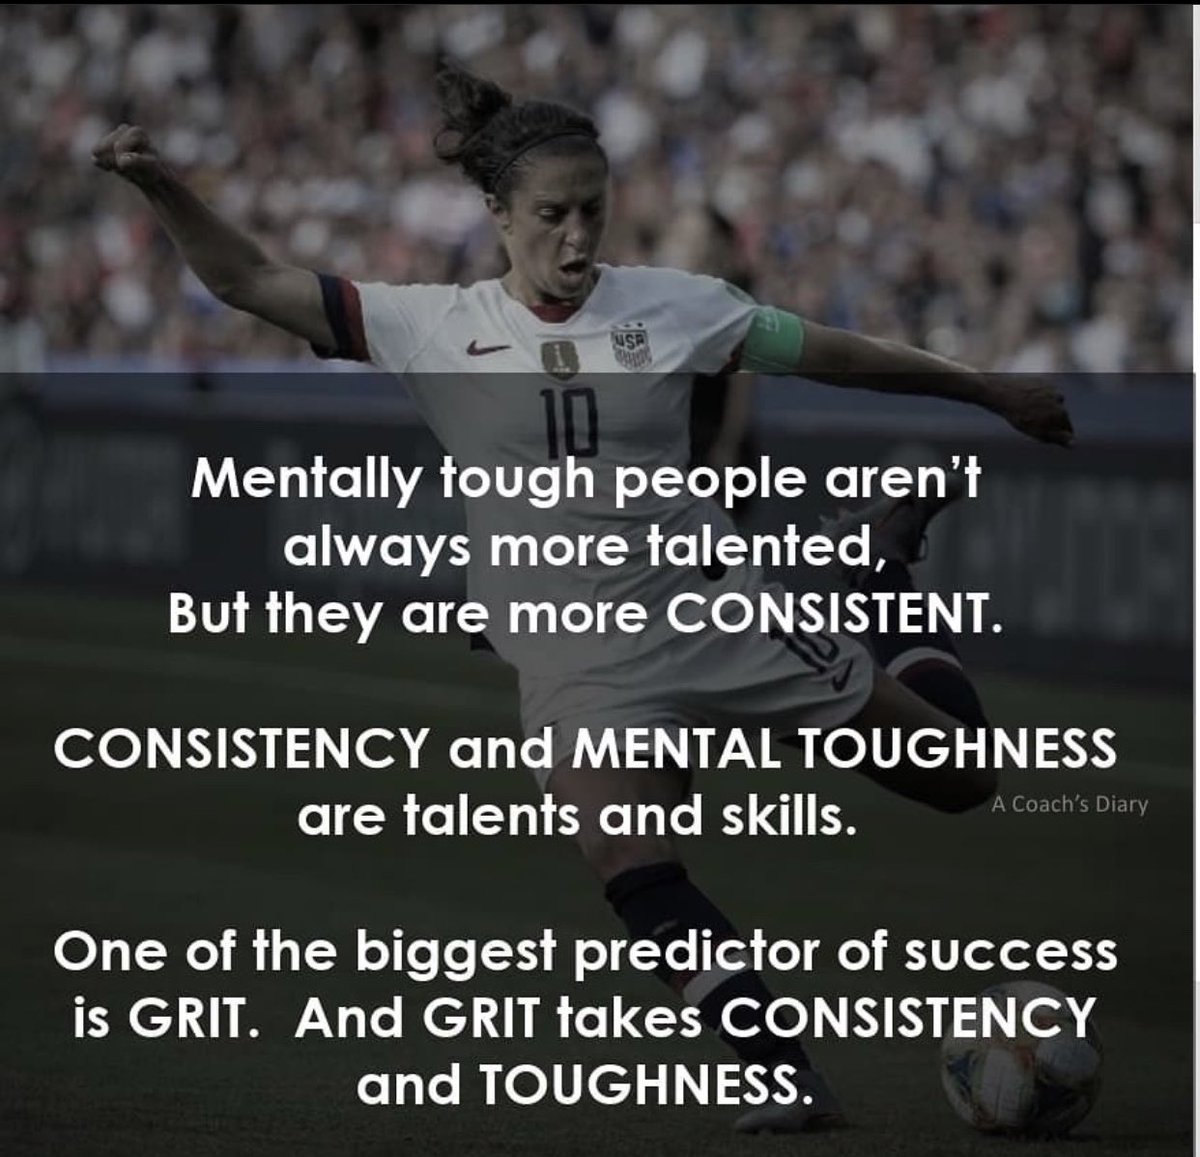 KCS Softball-it doesn’t only take skills to get to the level you want to be at. Just because you aren’t practicing every day, doesn’t mean you let up. Practice being mentally tough and not letting anything get in your way for your future goals @keyportsports